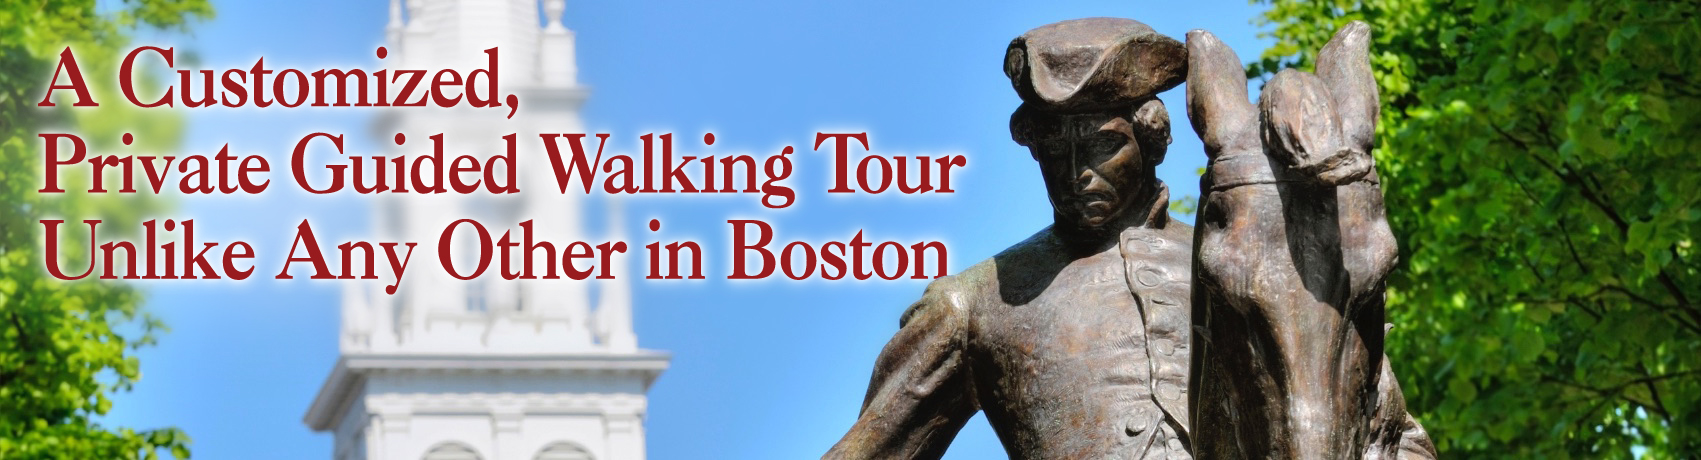 Customized Private Guided Walking Tour of Historic Boston